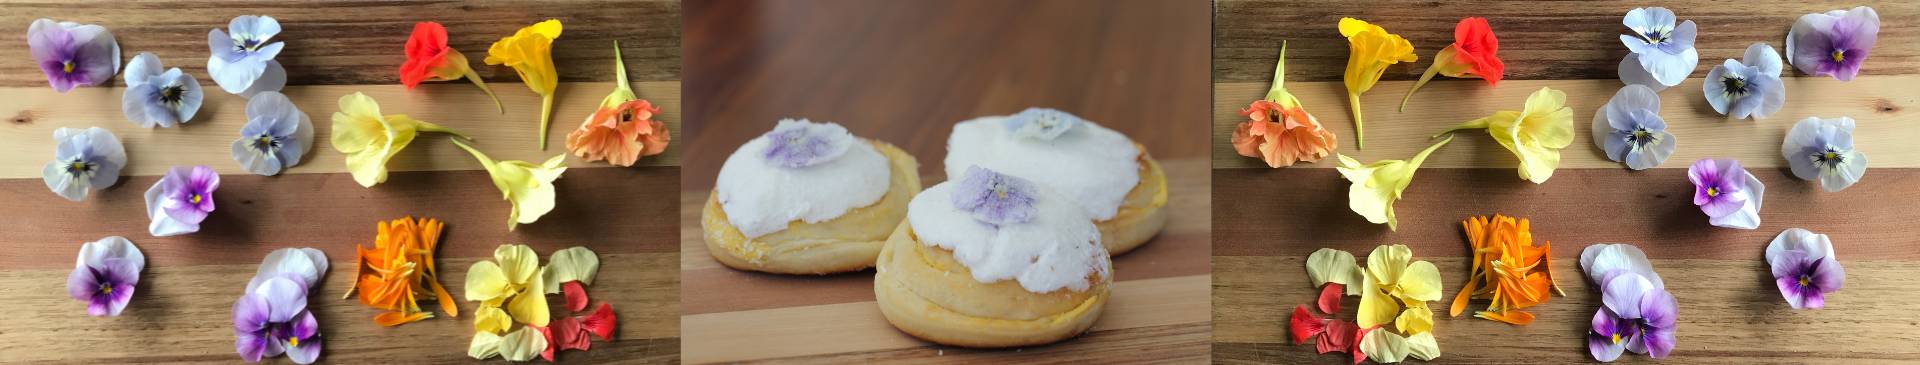 How to Make Crystallised Flowers: A Step-by-Step Guide